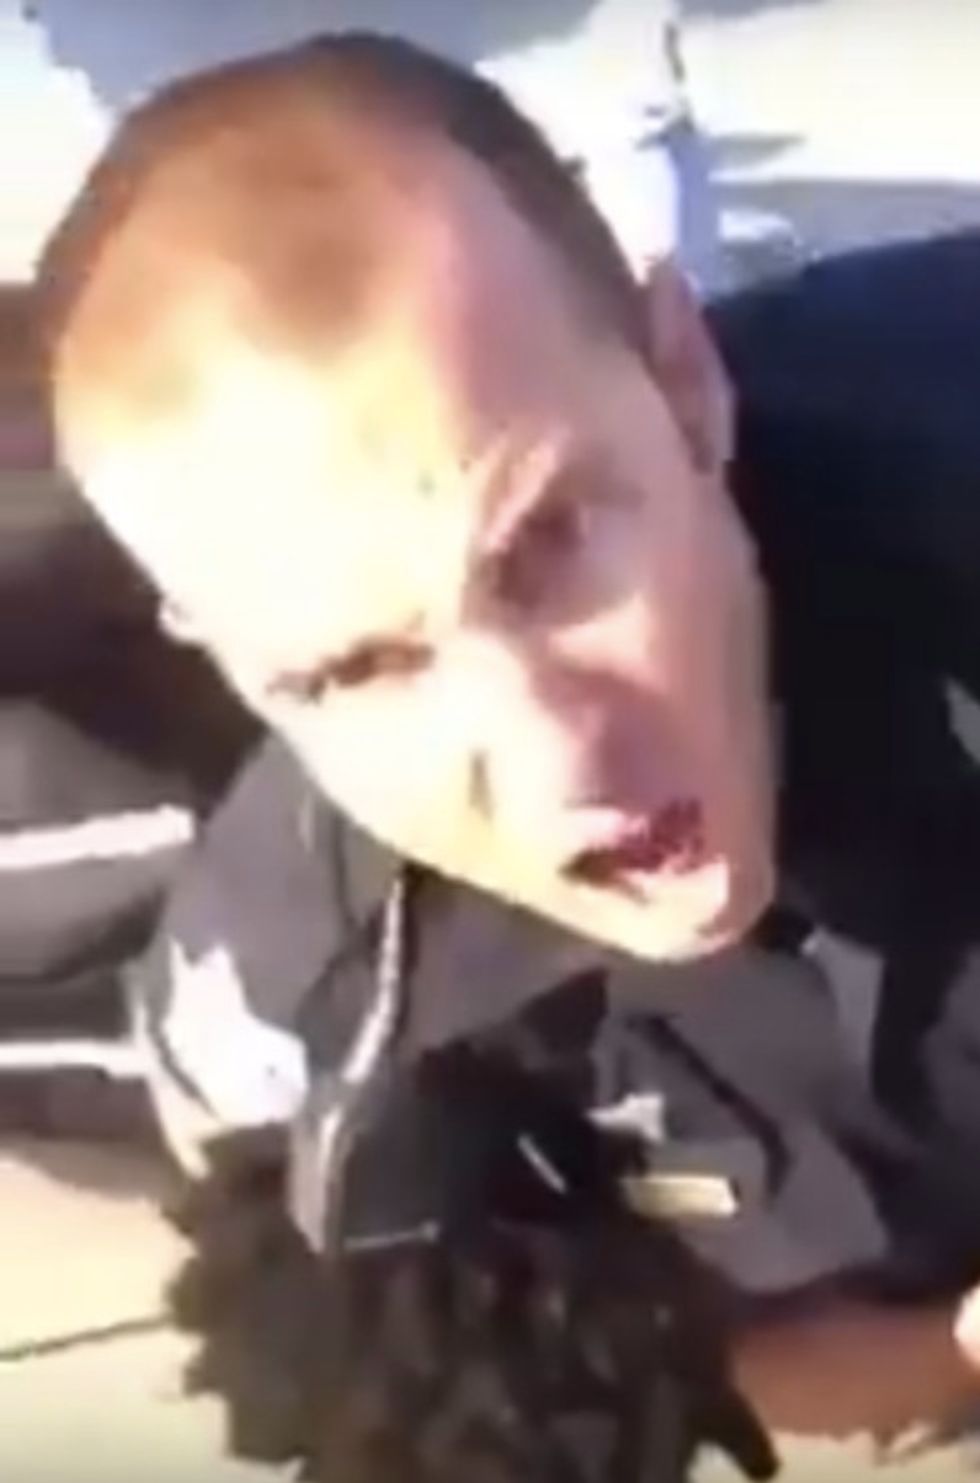 'Black Lives Matter, Motherf***er!': Video Shows Cop’s Intense Struggle With Teen After He Was Stopped for Jaywalking (UPDATE: Police Account Released)